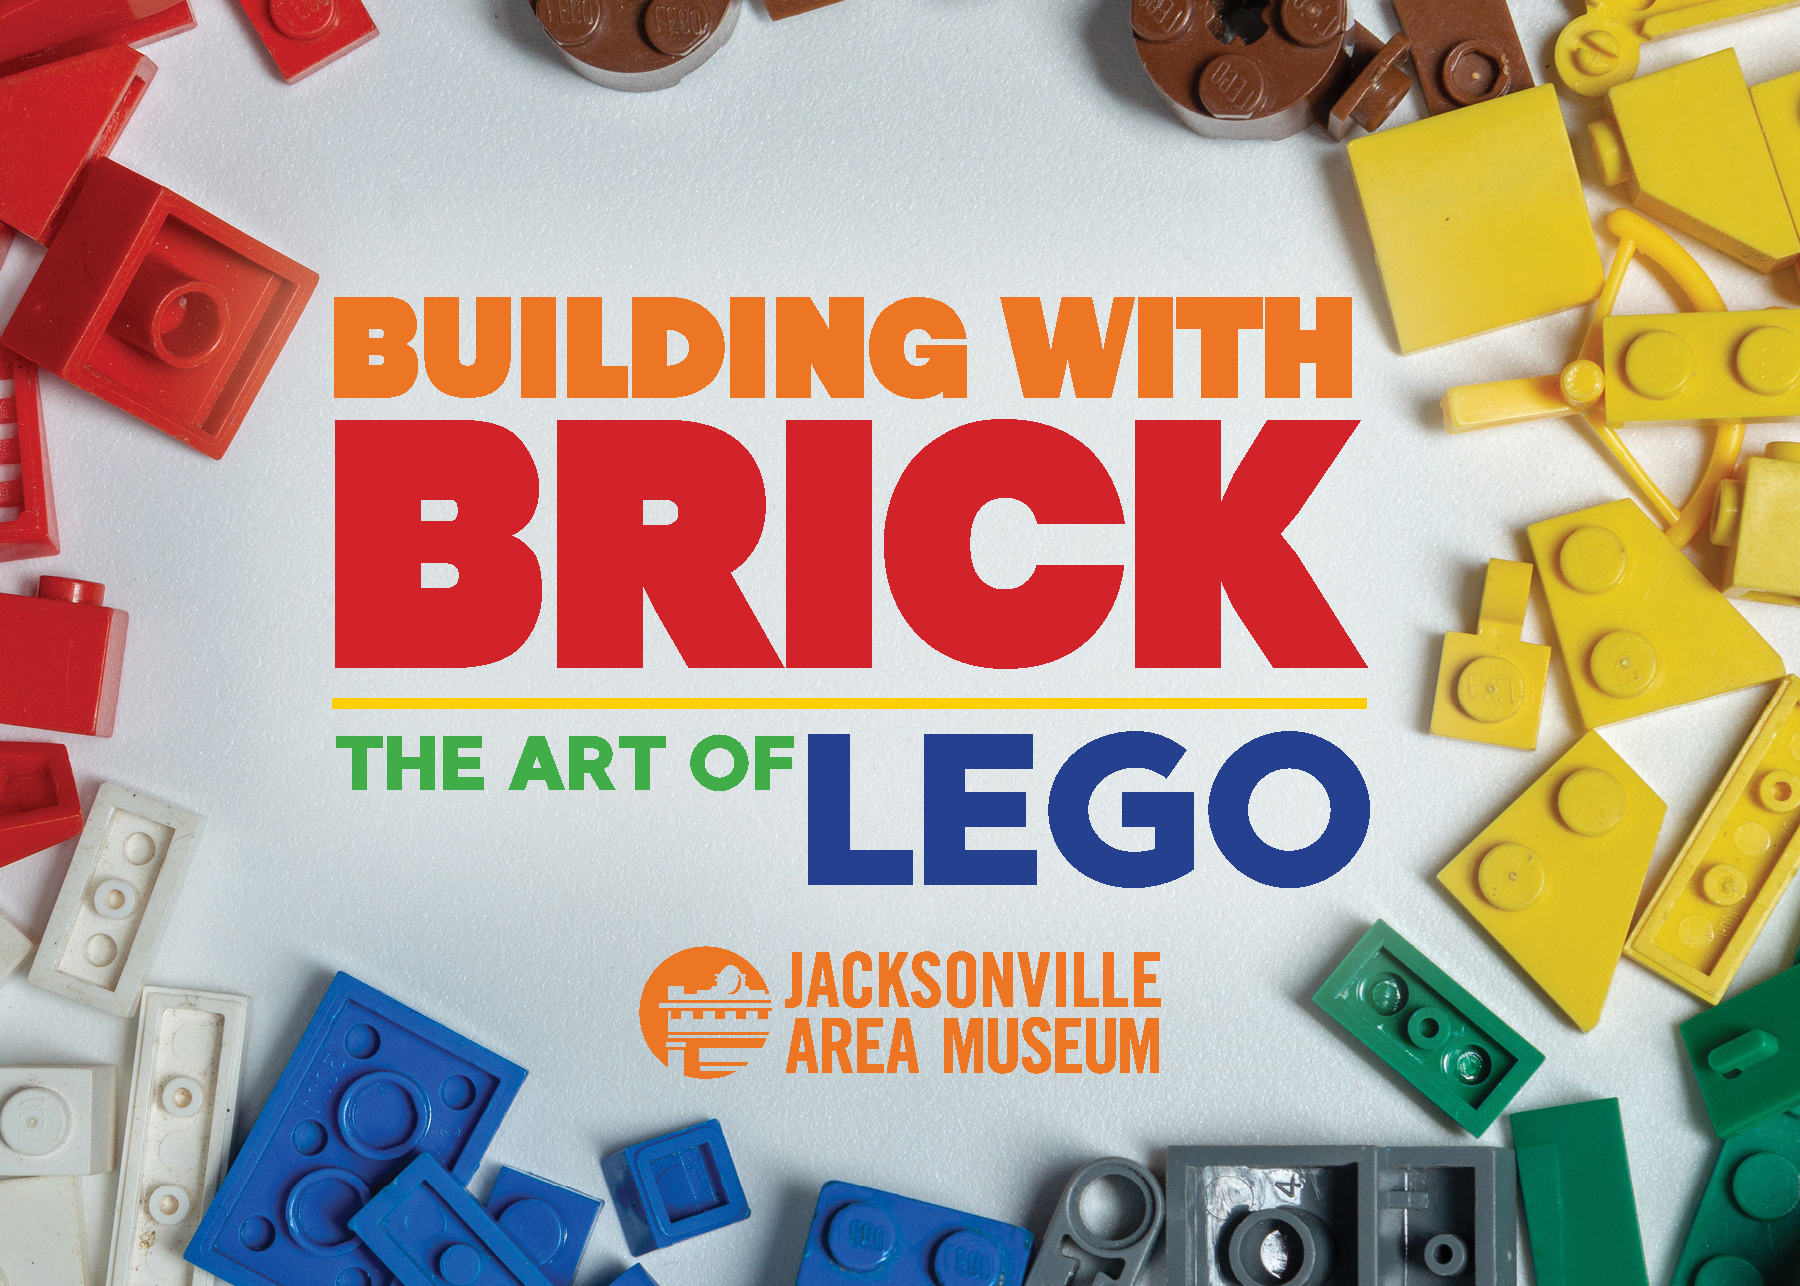 Building with Brick – The Art of LEGO” returns to Jacksonville Area Museum